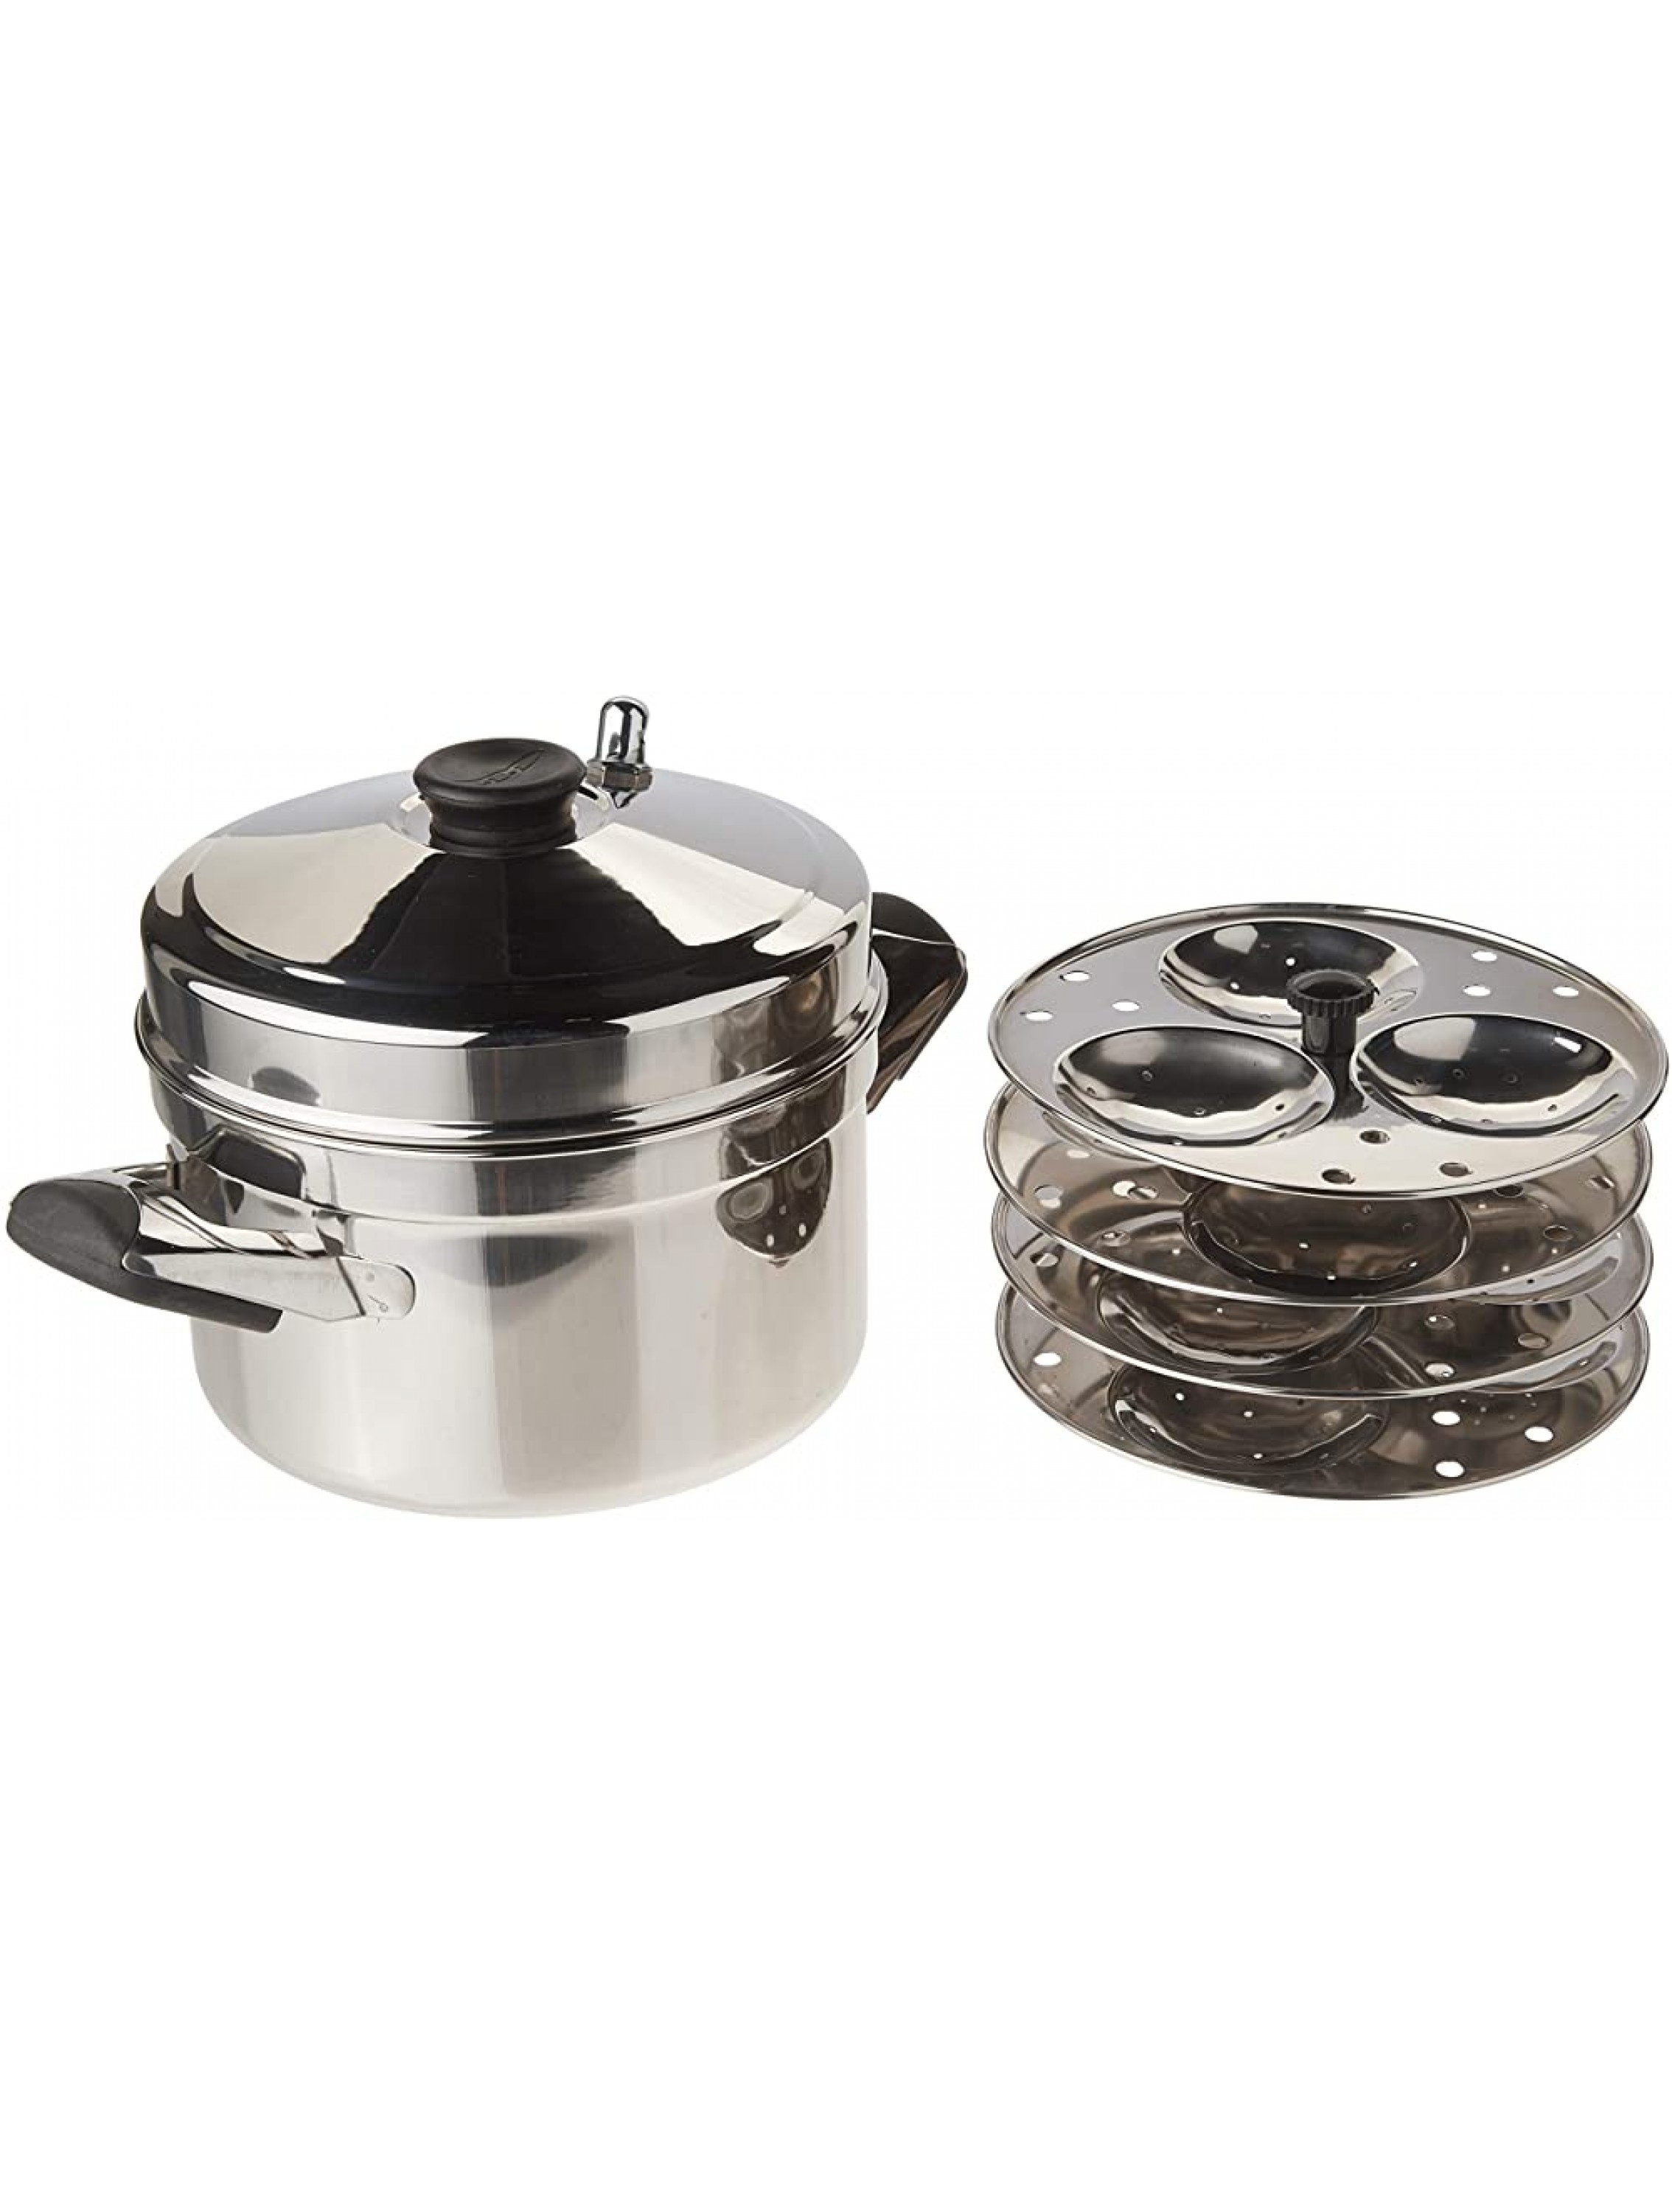 Tabakh HIC-204 4-Rack Stainless Steel Idli Cooker w Hawkins Type Stand Makes 12 Idlis - BA7PAF5X6